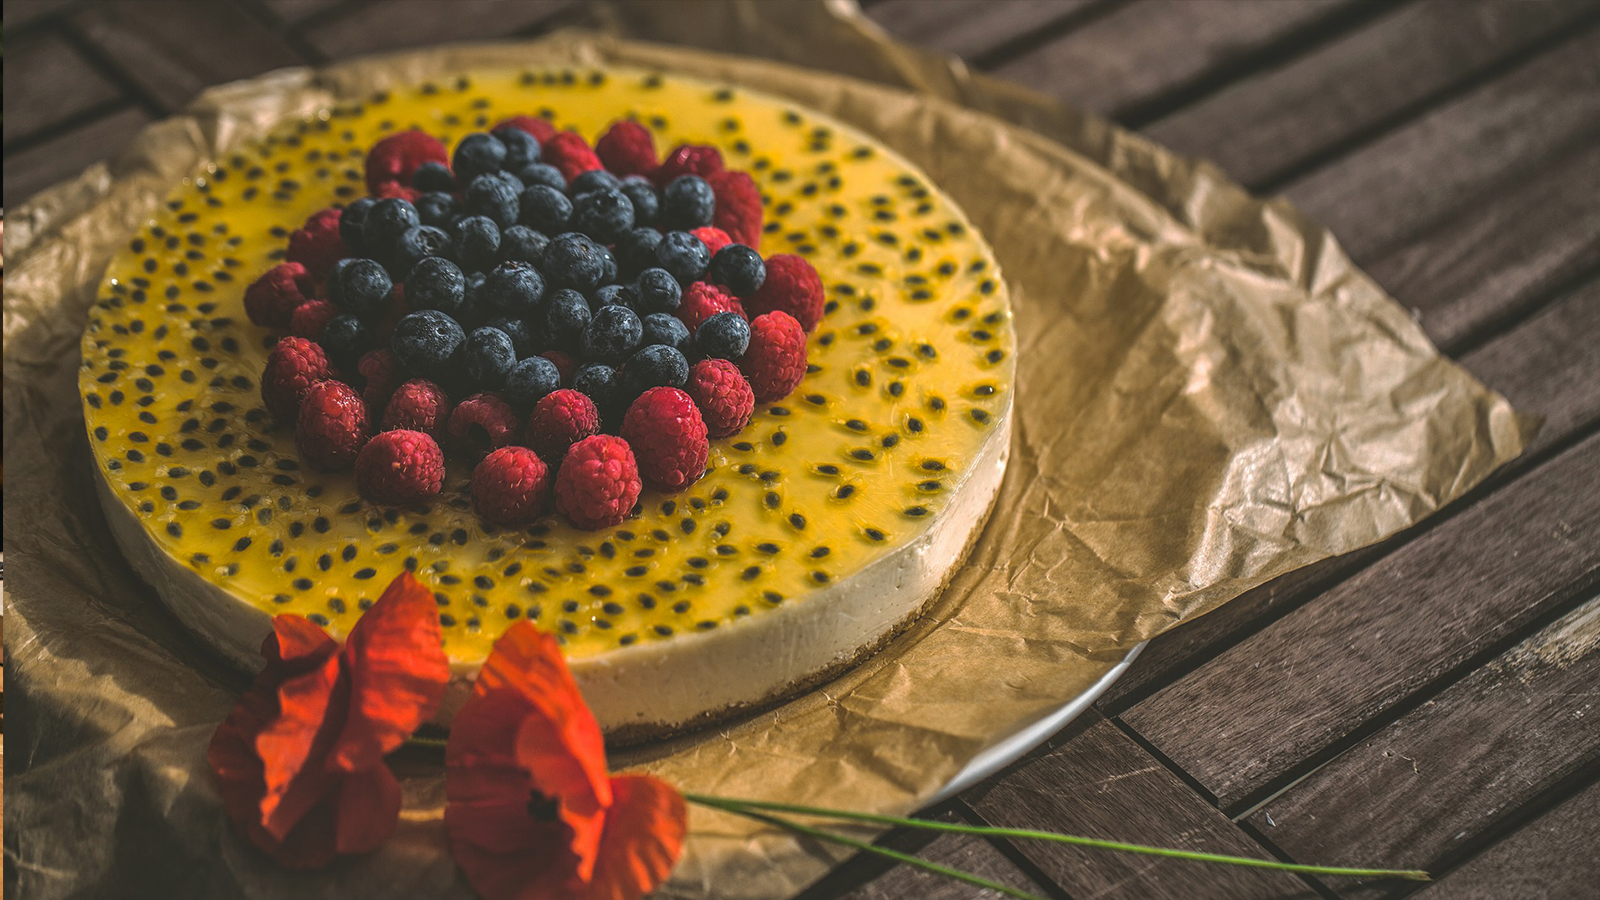 5 ways to decorate your cheesecake | The Neff Kitchen